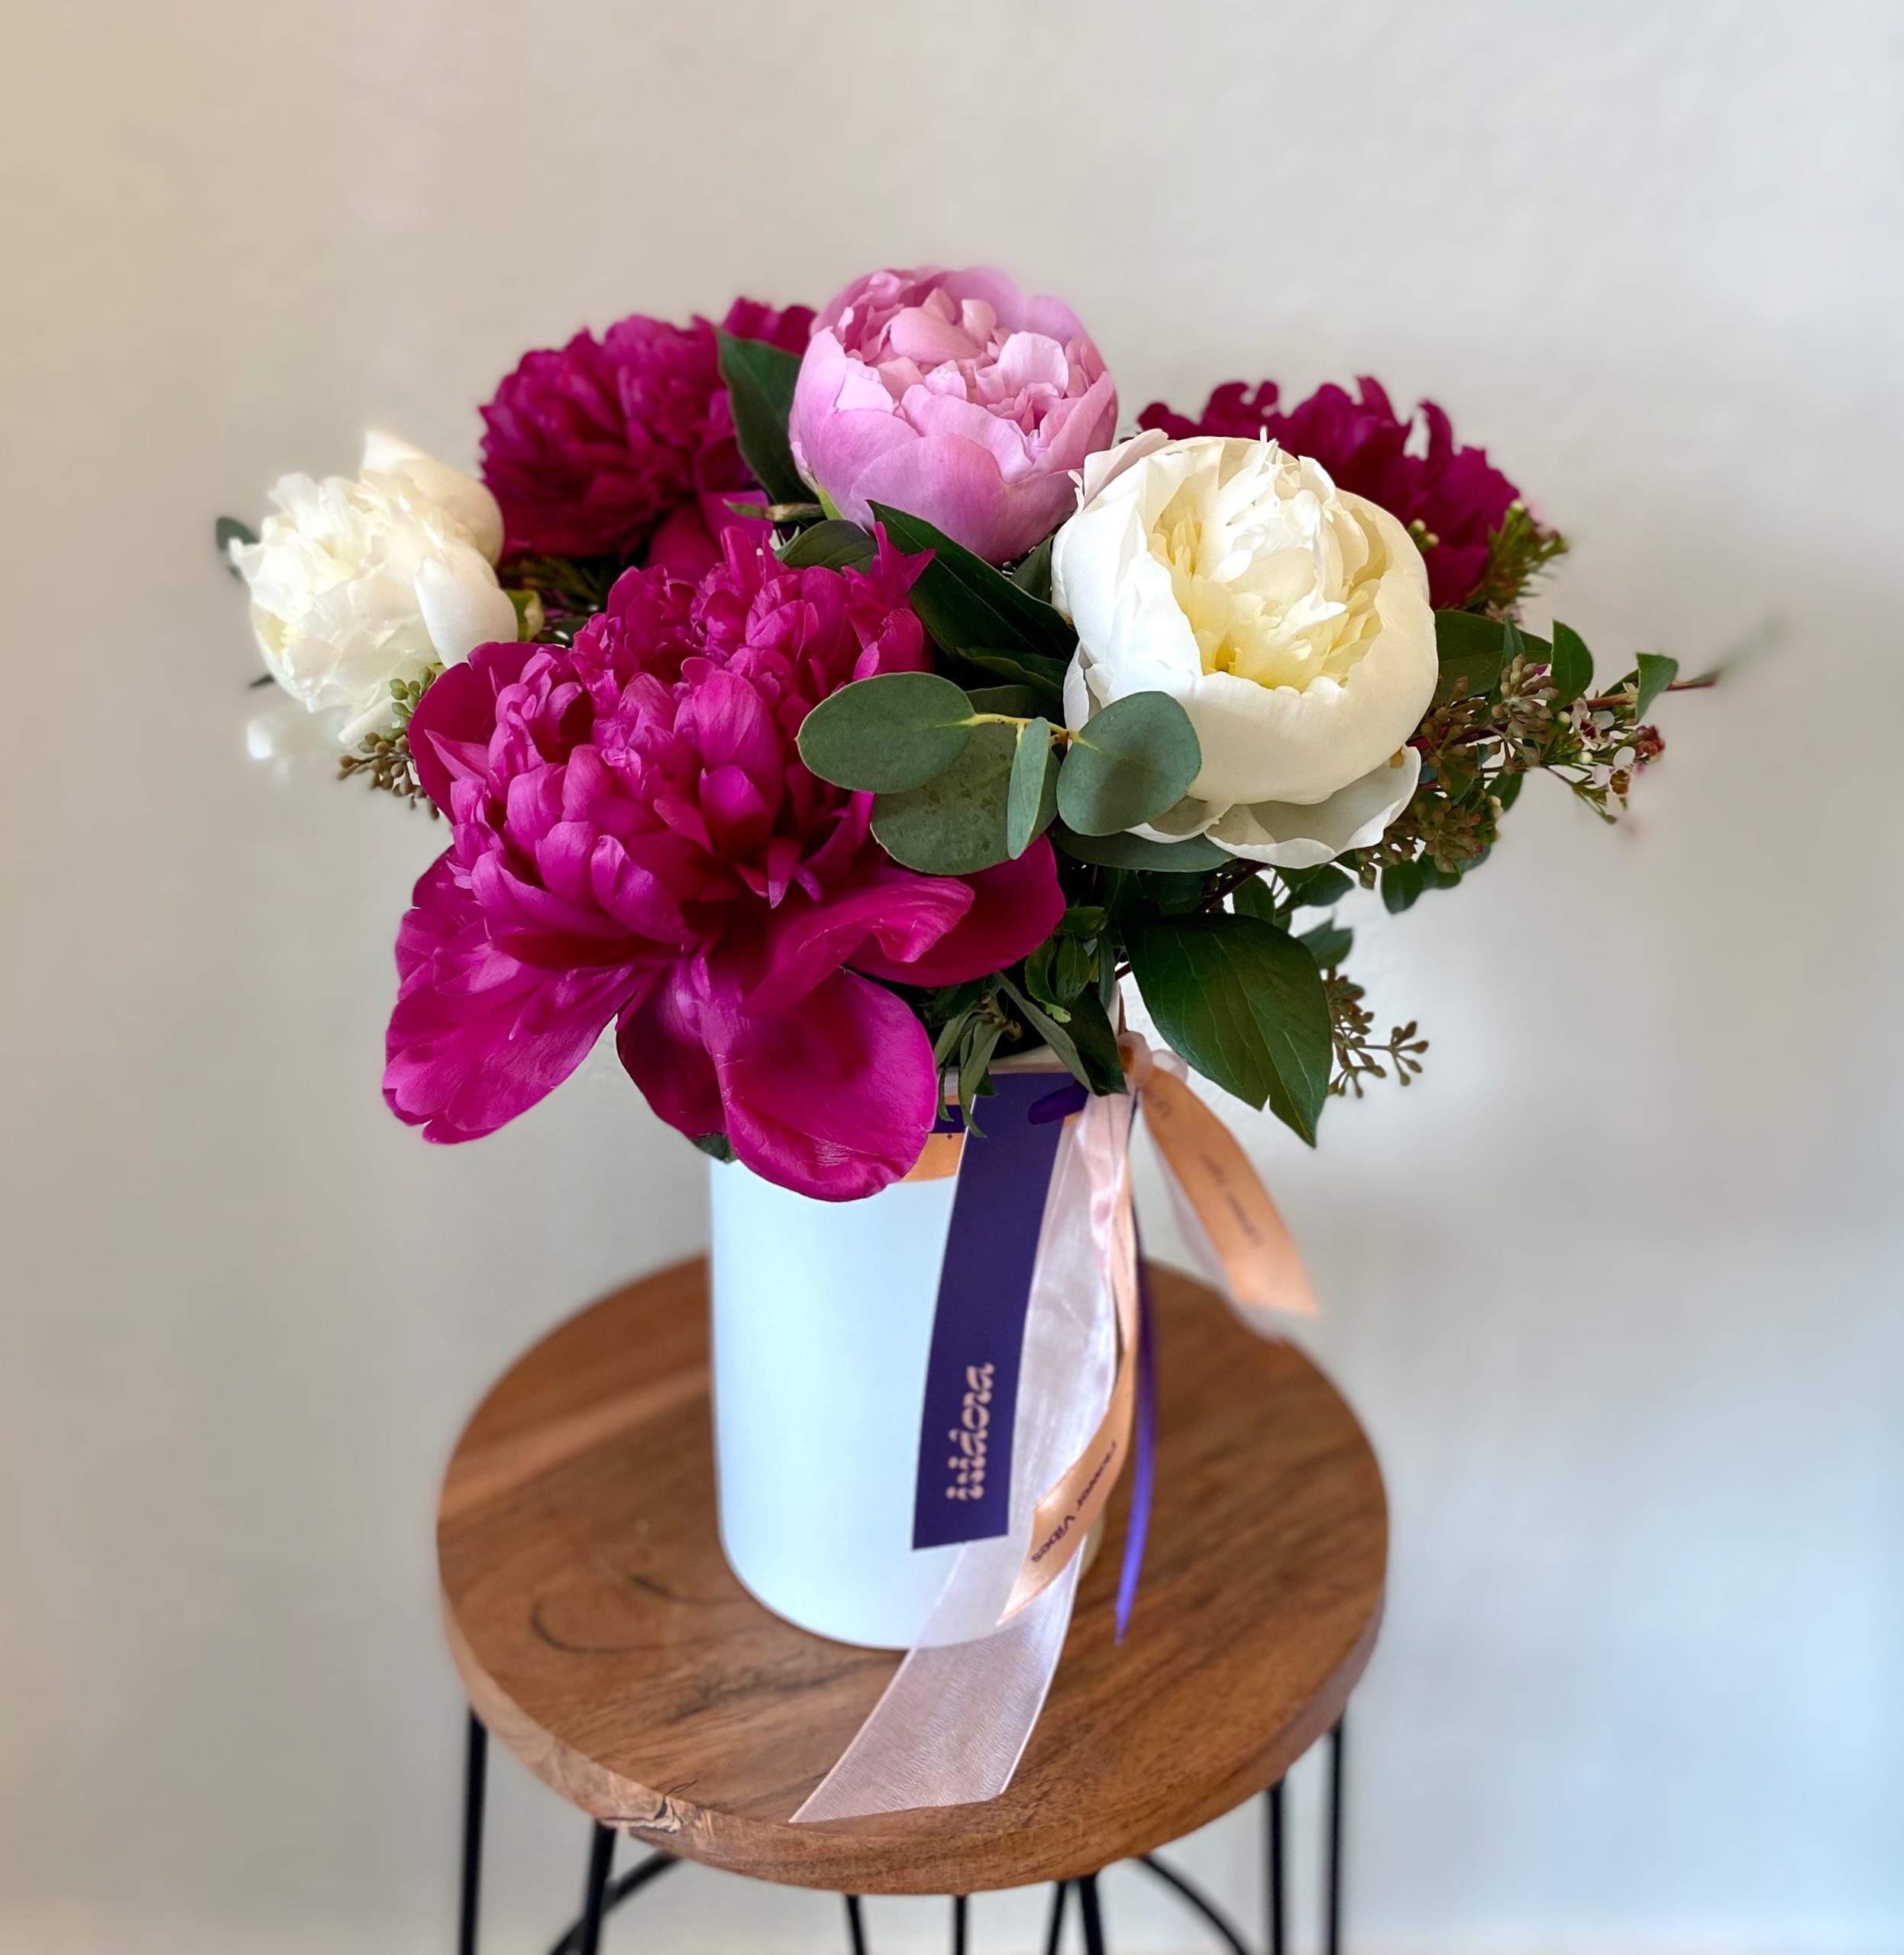 Send a Bouquet of Peonies in Houston